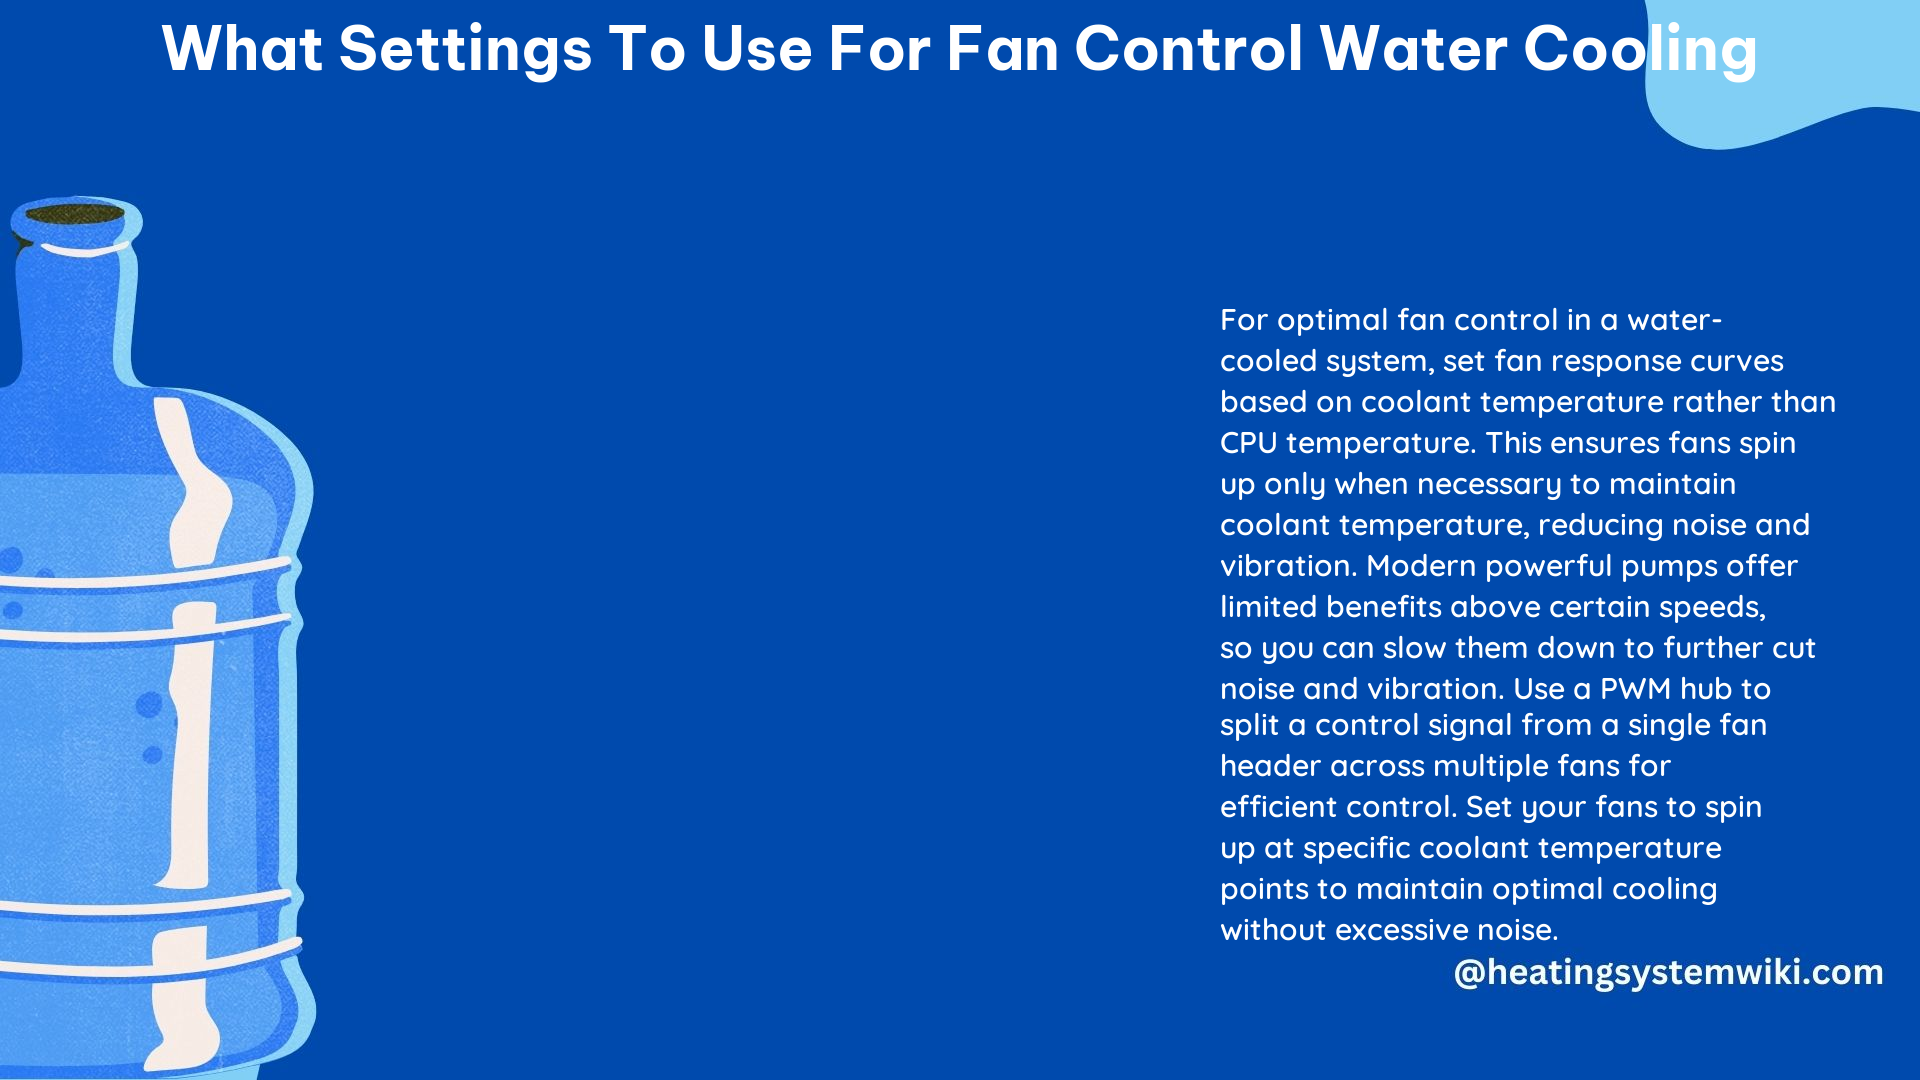 What Settings to Use for Fan Control Water Cooling